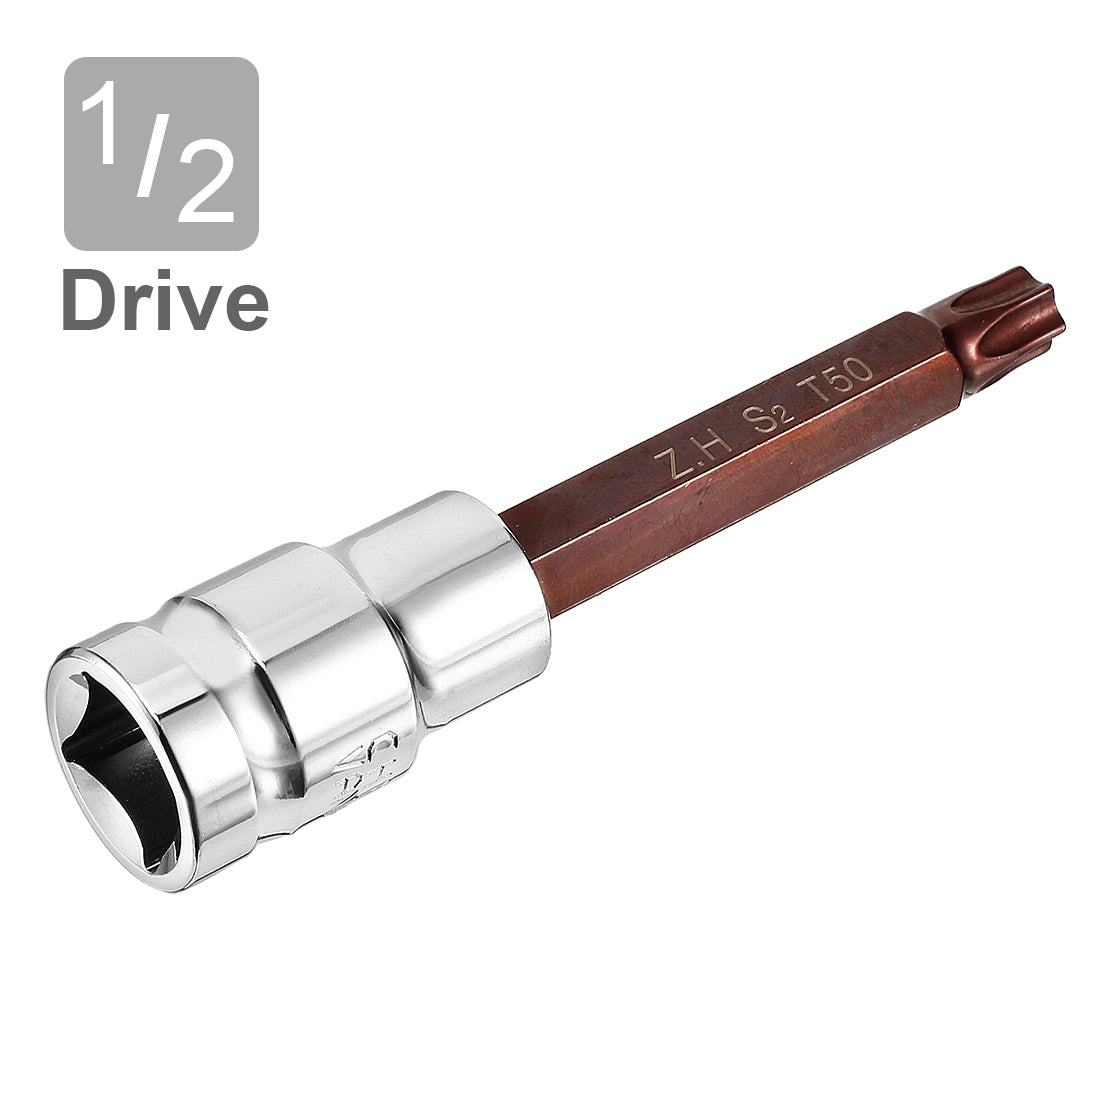 uxcell Uxcell Drive x Torx Bit Socket, S2 Steel Bits, CR-V Sockets (For Hand Use Only)